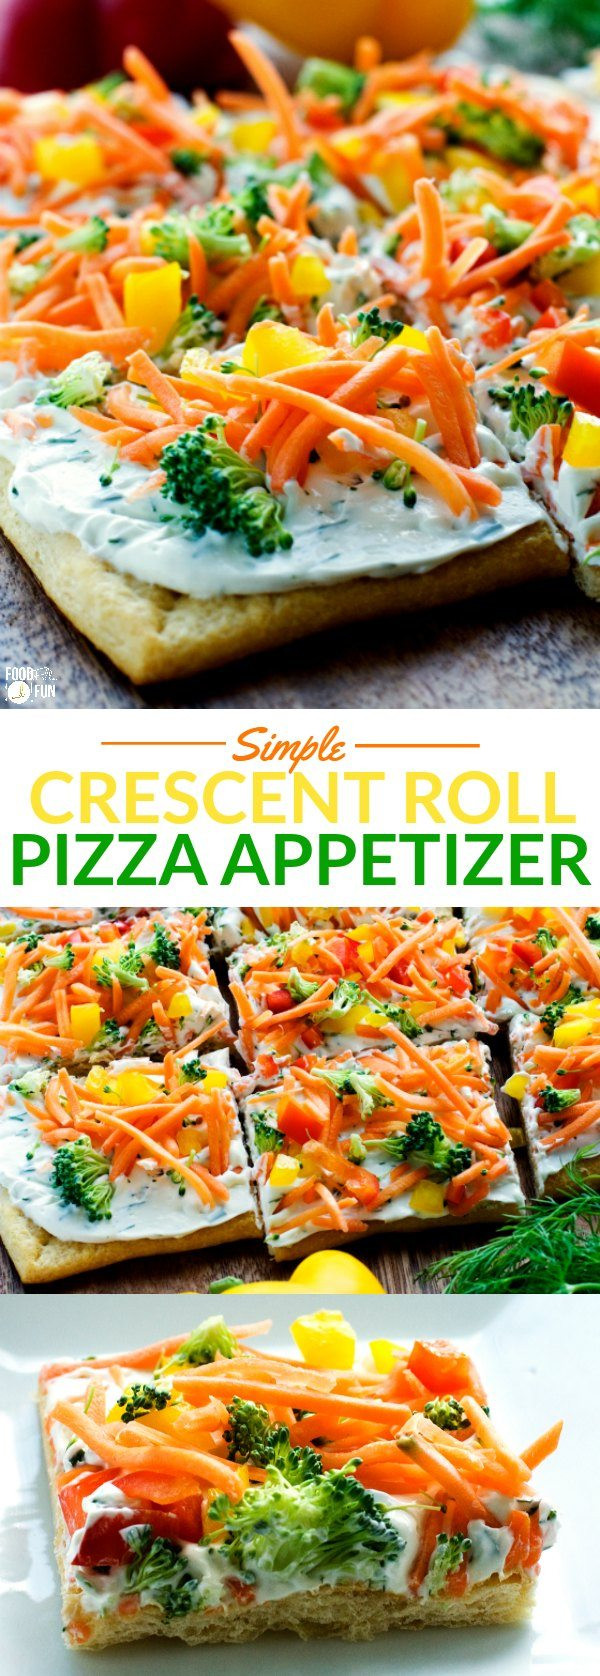 Appetizers Using Crescent Rolls
 Simple Crescent Roll Pizza Appetizer • Food Folks and Fun